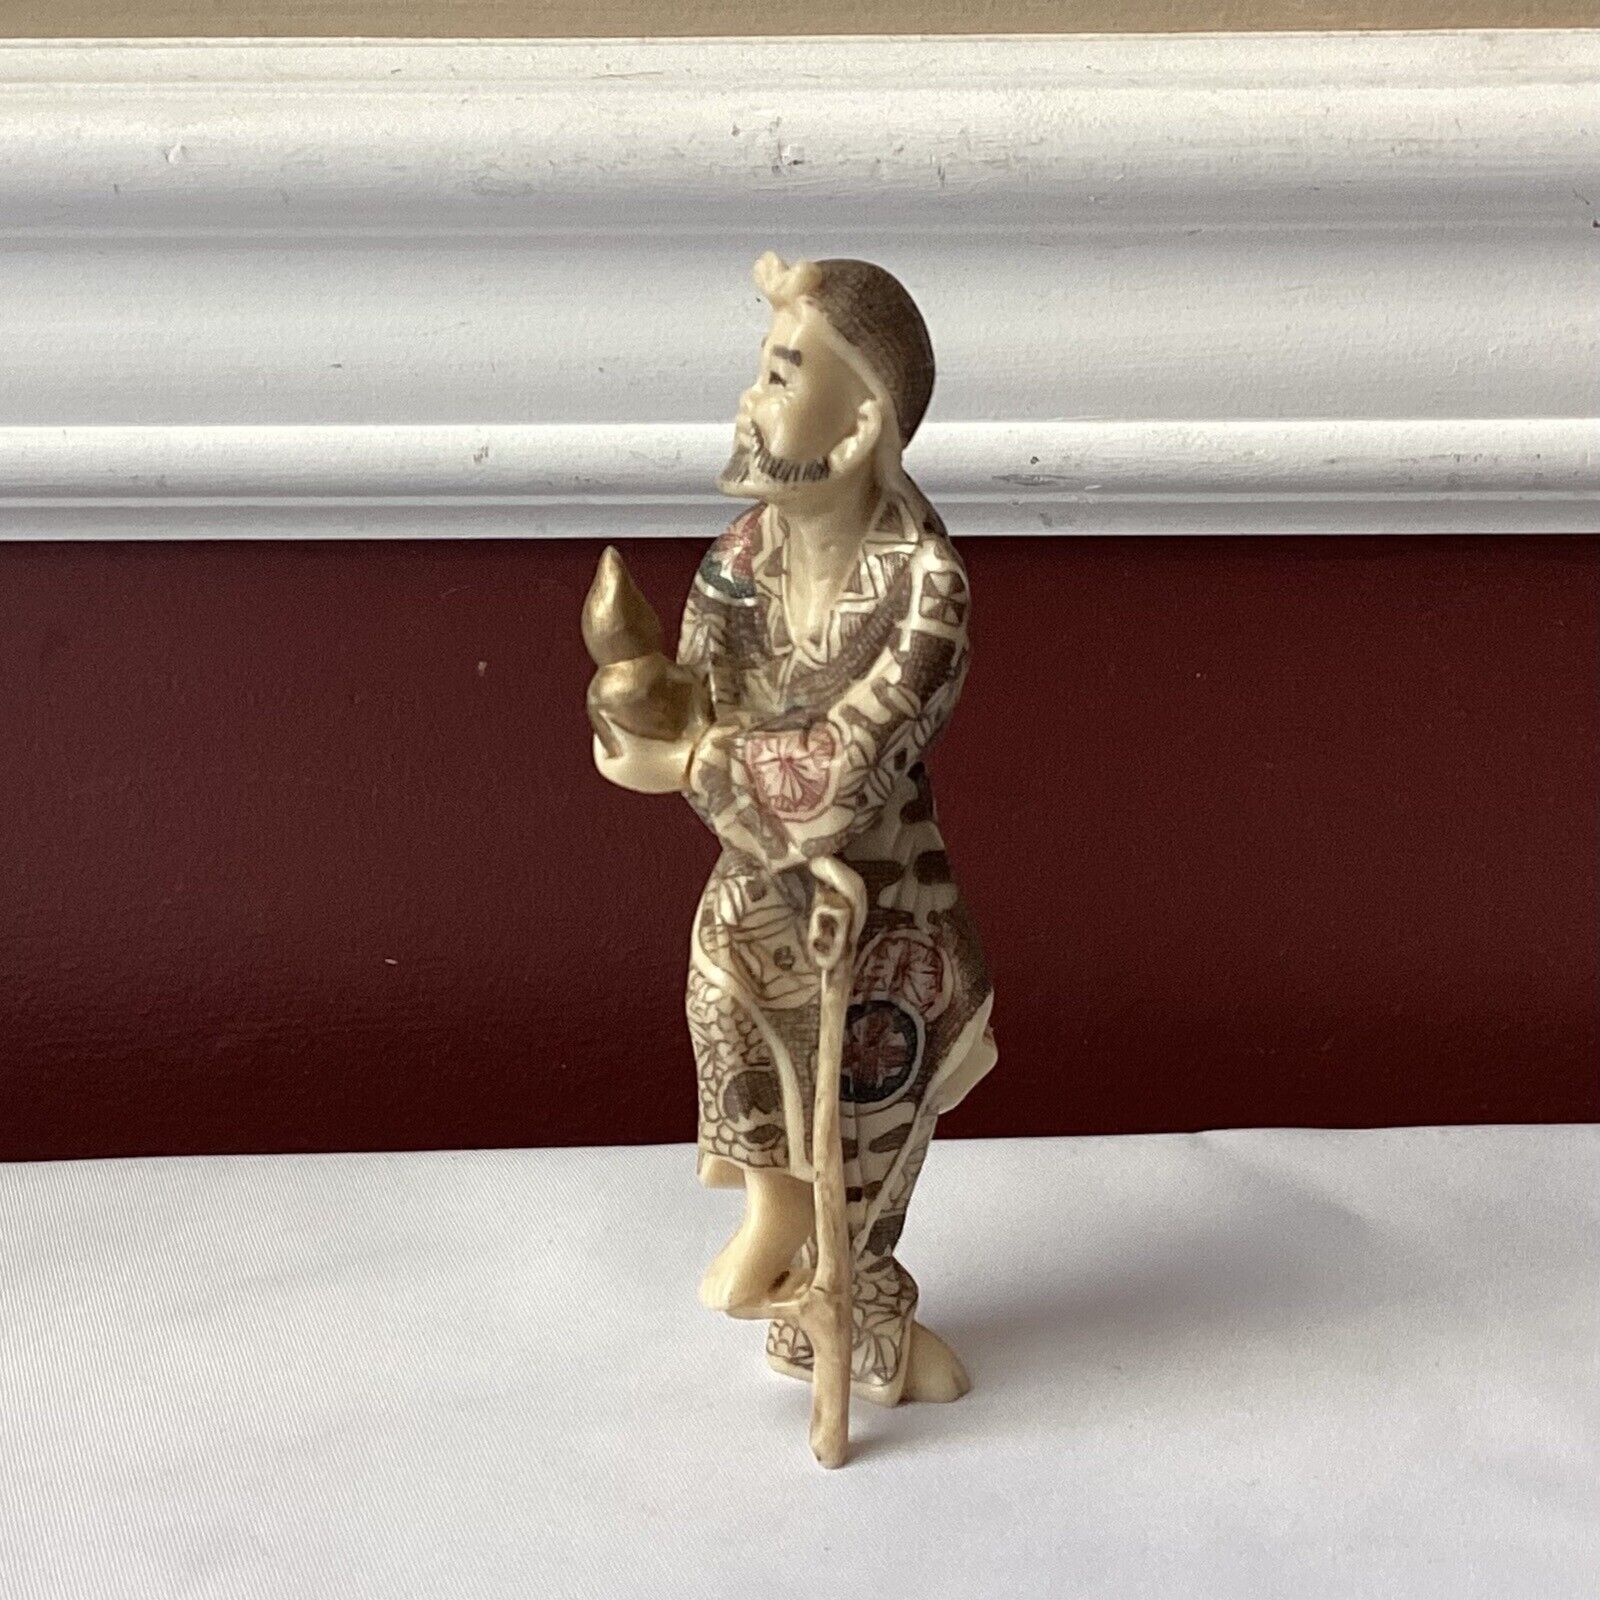 VTG Japanese/Chinese Carved Resin Figurine, 5 1/2” T, Unmarked